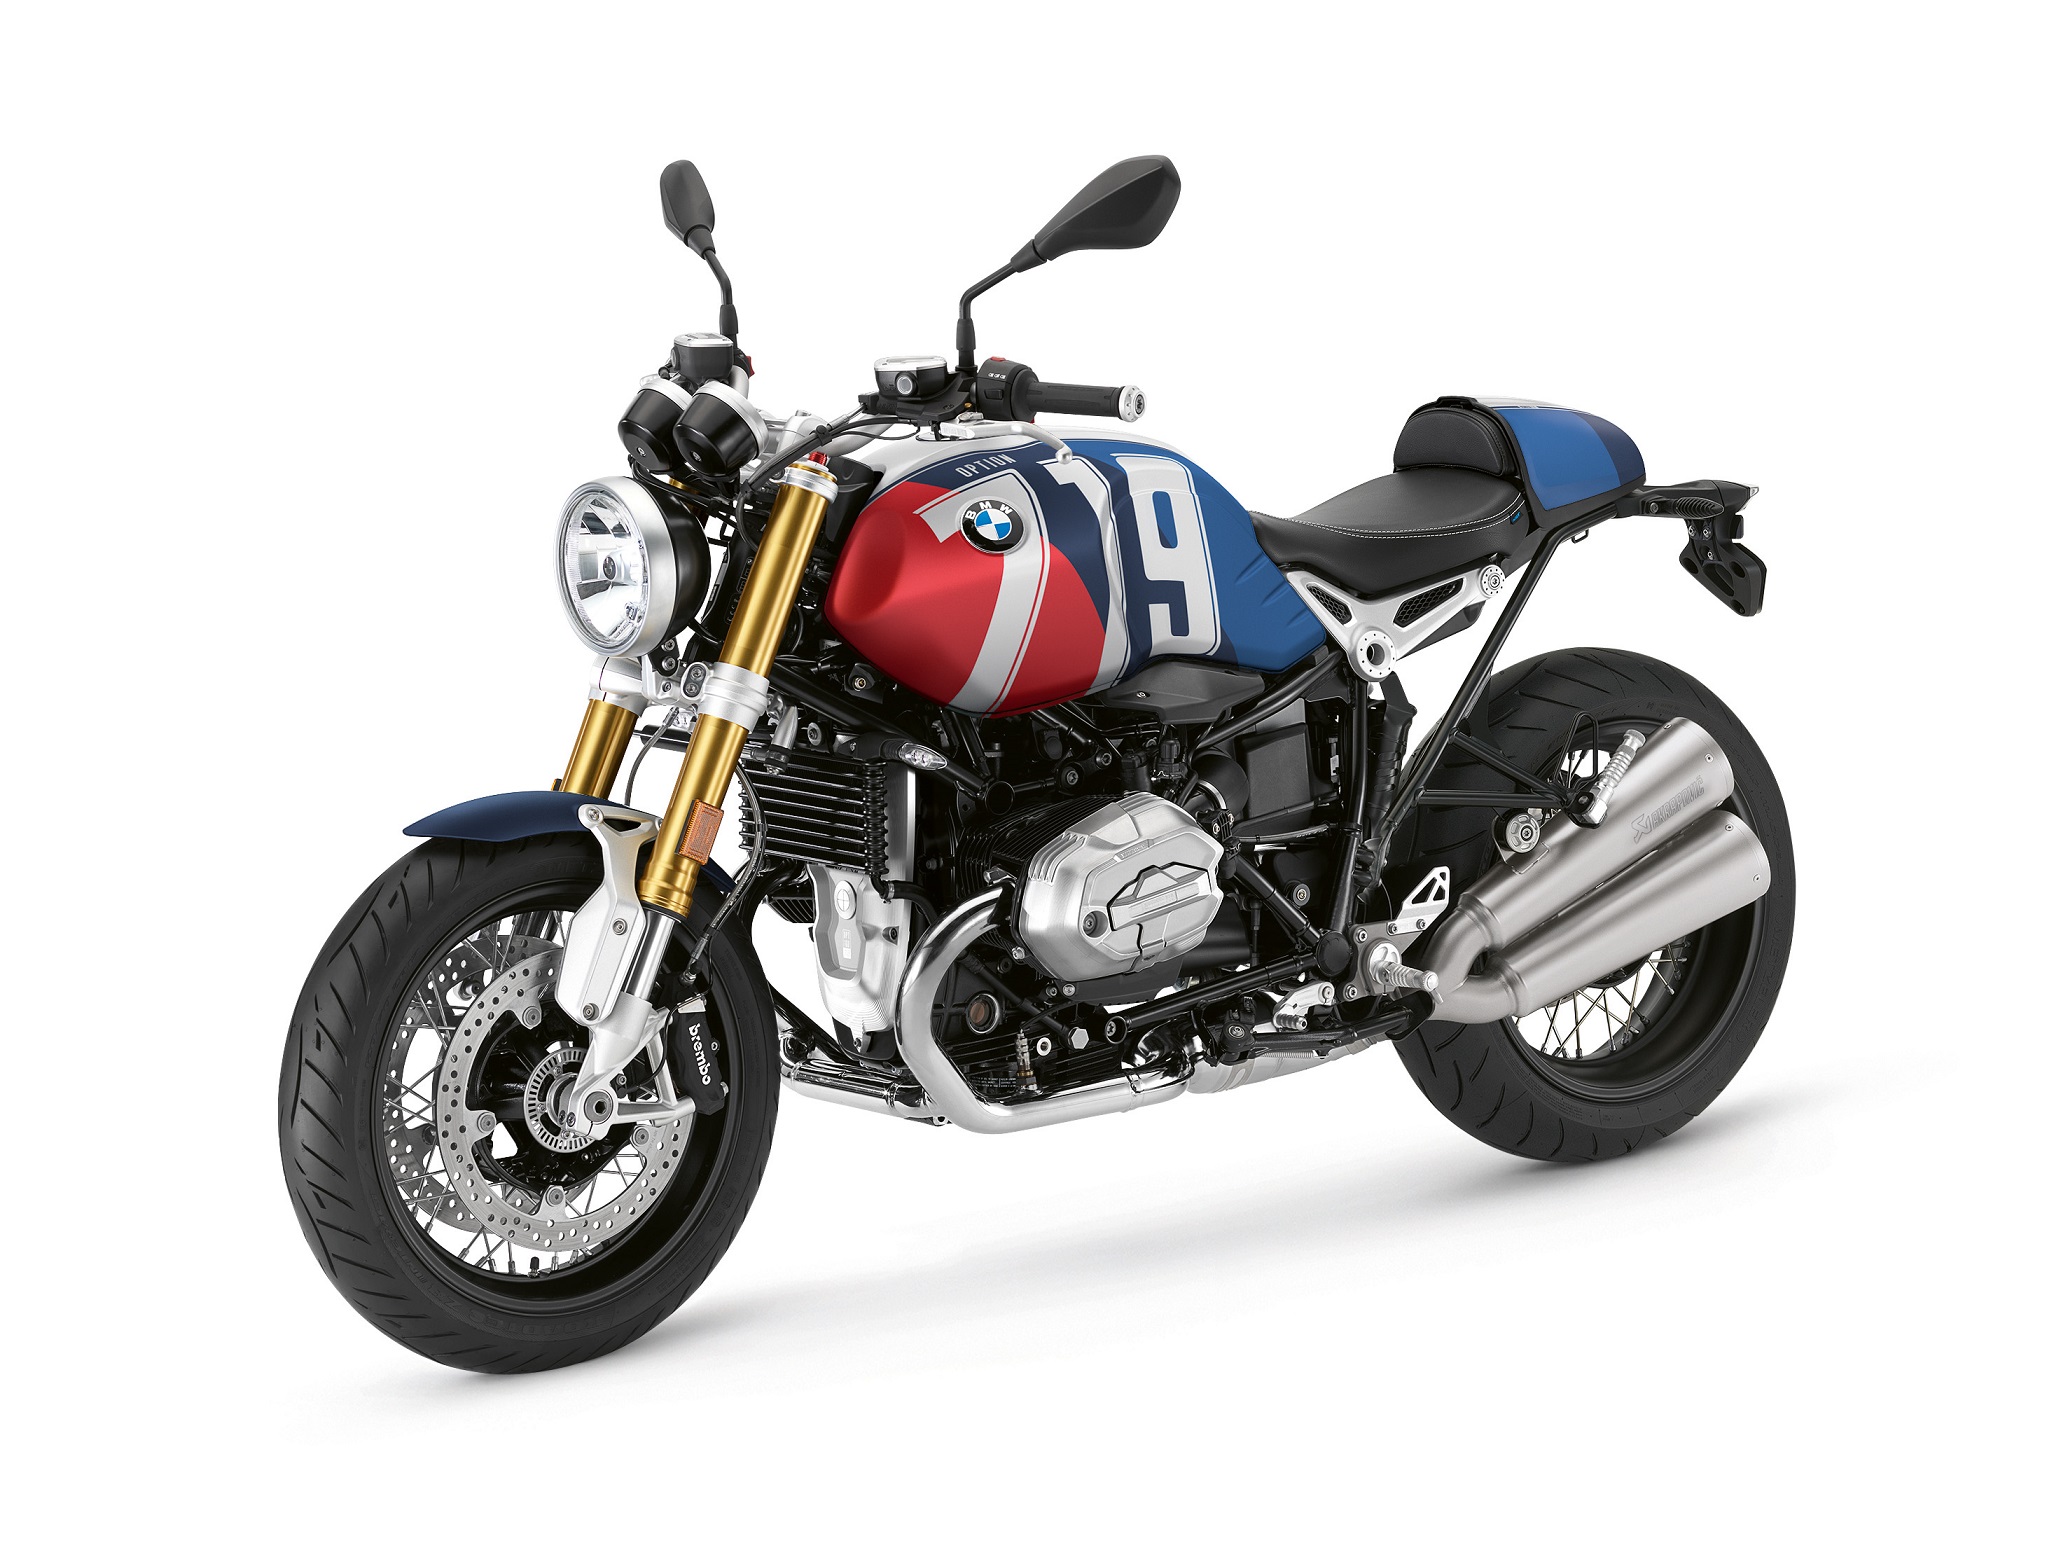 Bmw R Ninet Motorcycles Now Available In New Option 719 Color